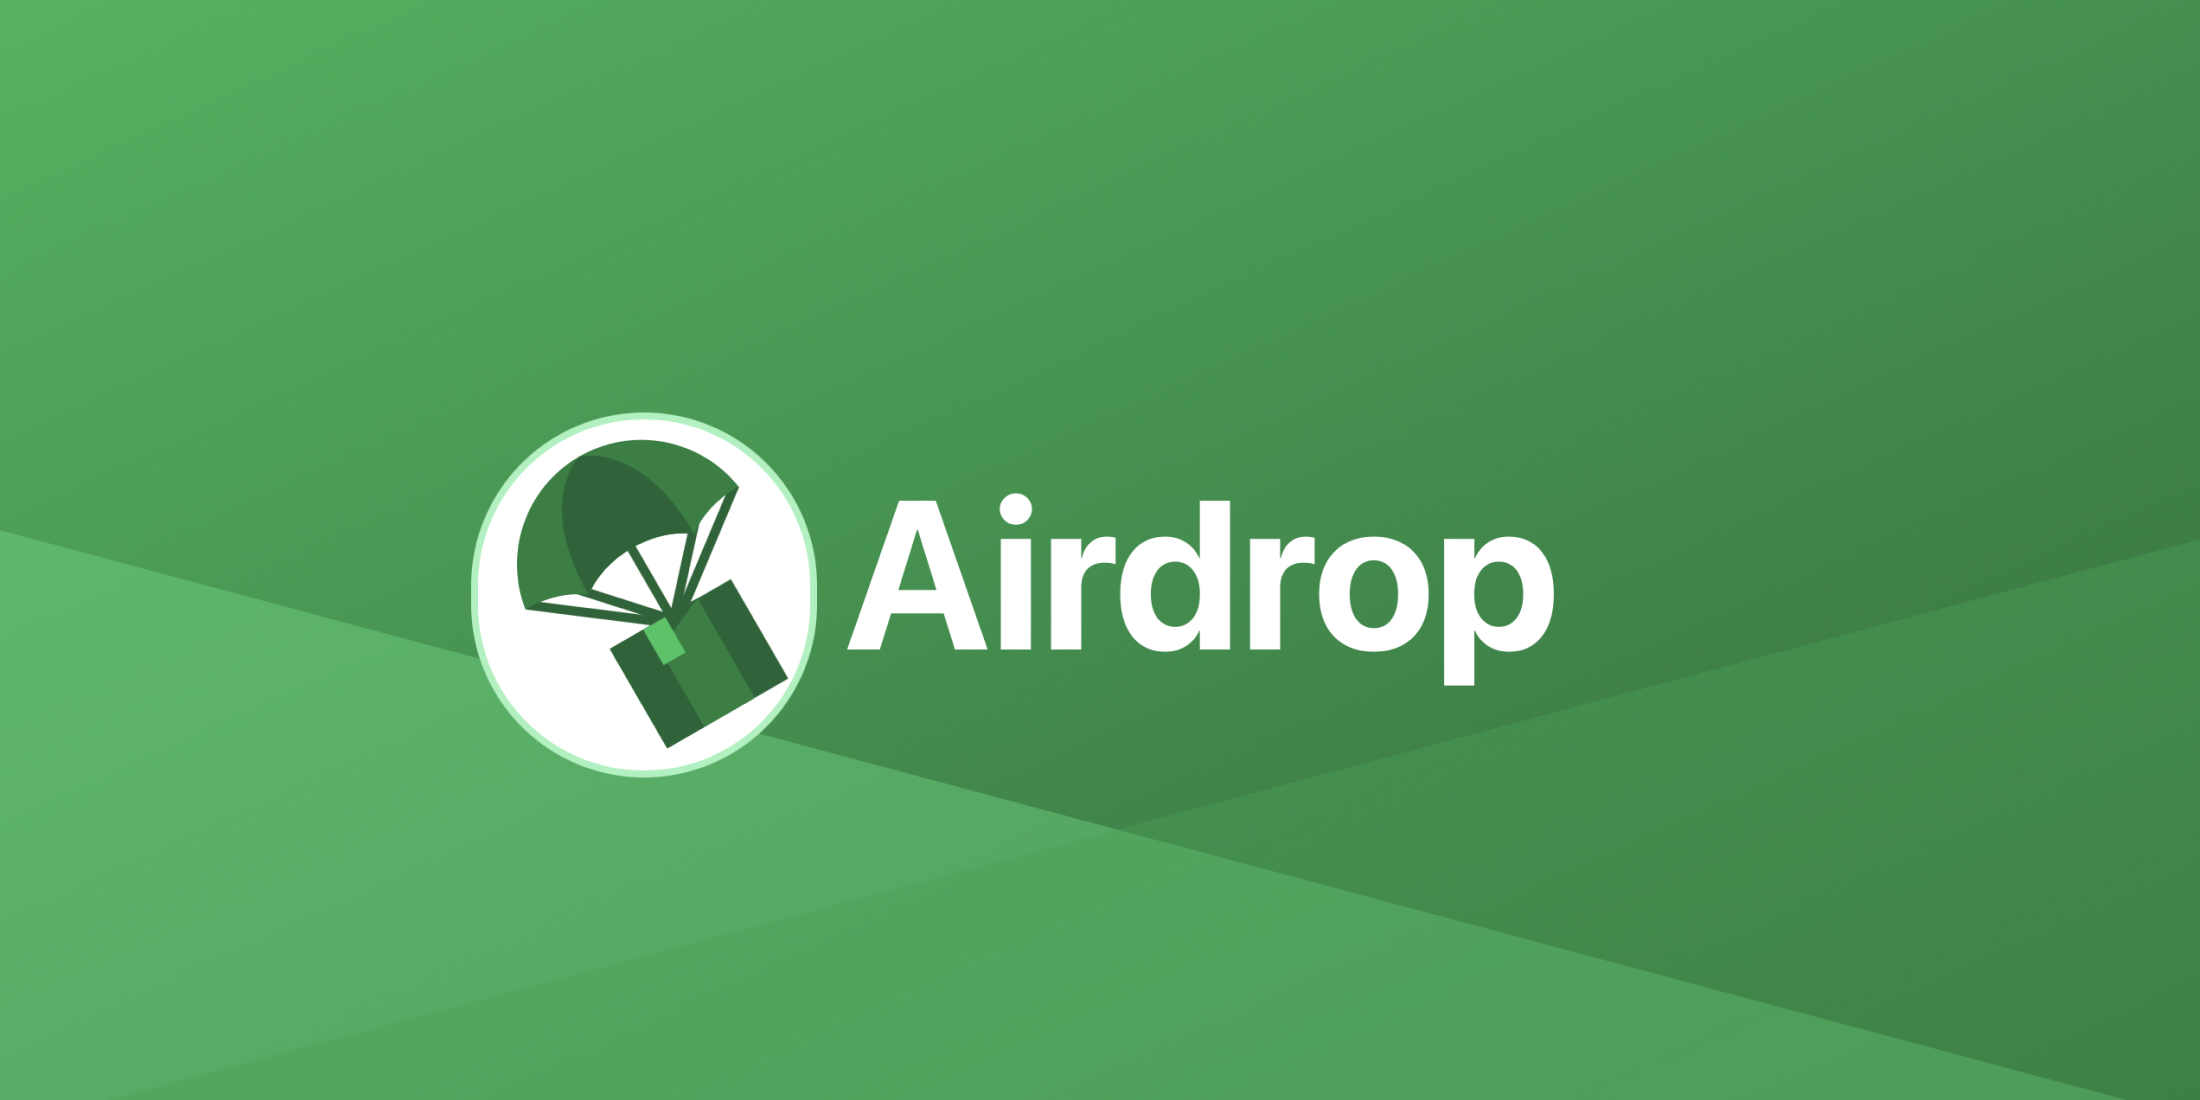 Speed up your CI builds with Airdrop image